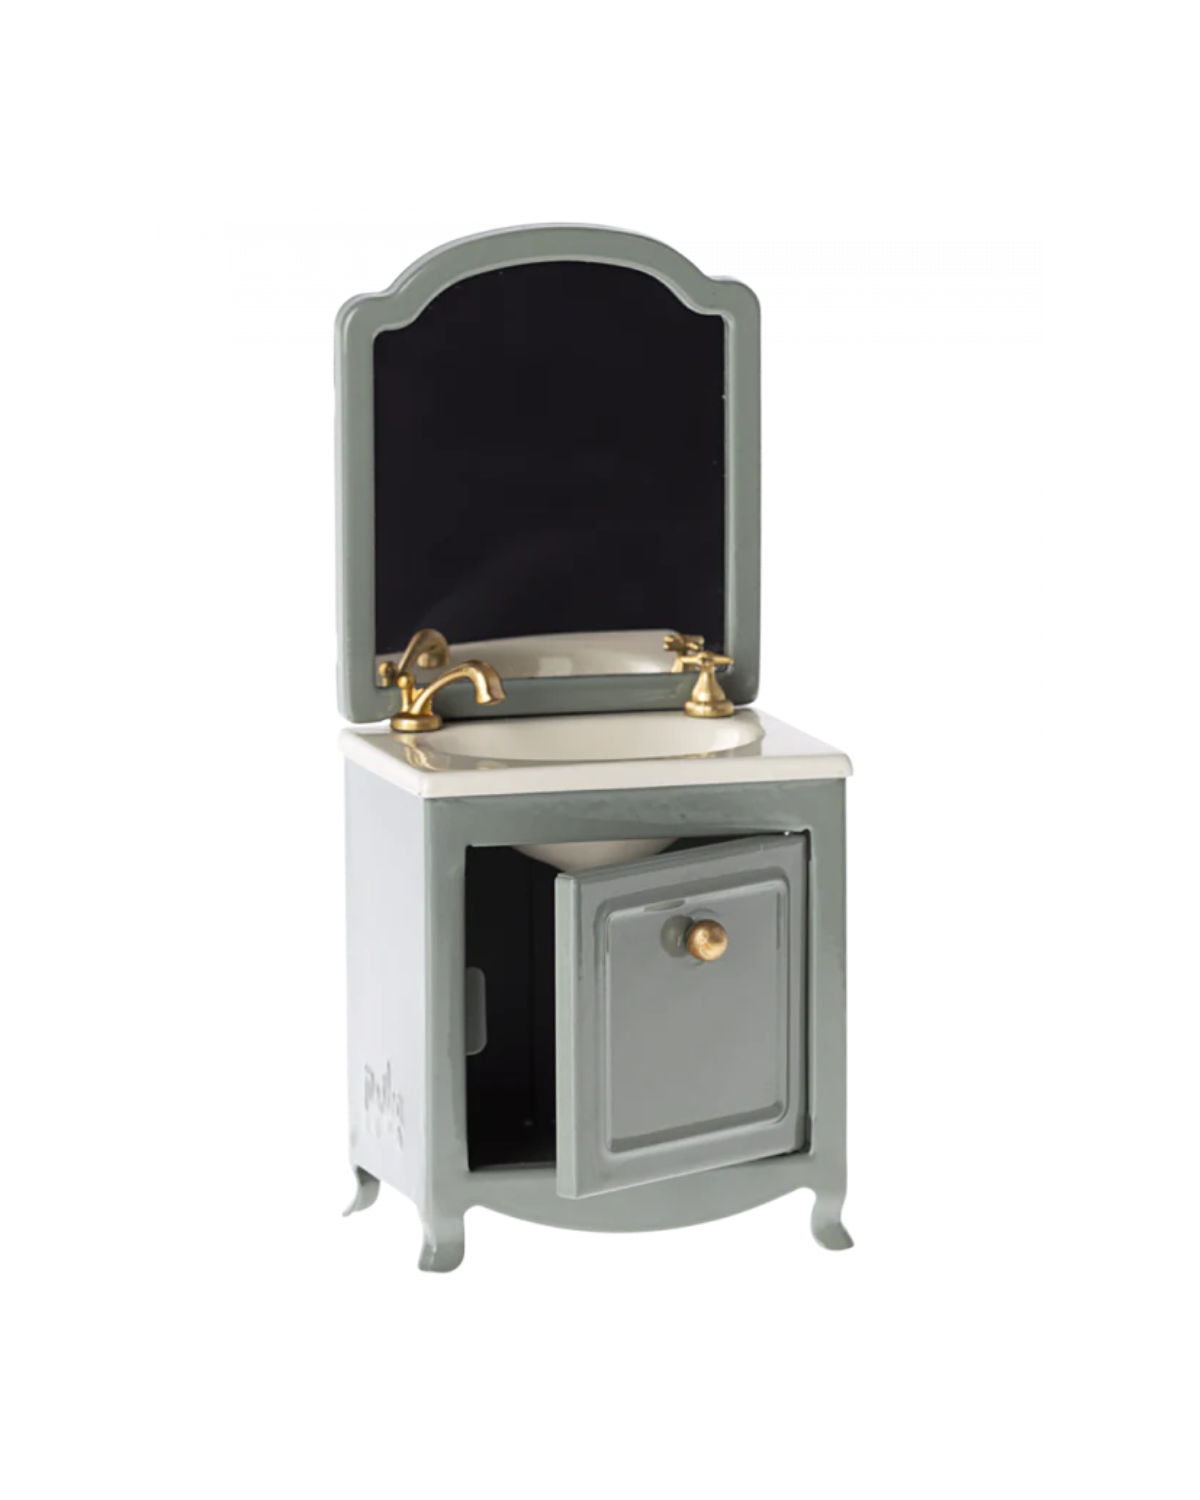 Mouse Sink with Mirror in Dark Mint: Dollhouse Furniture